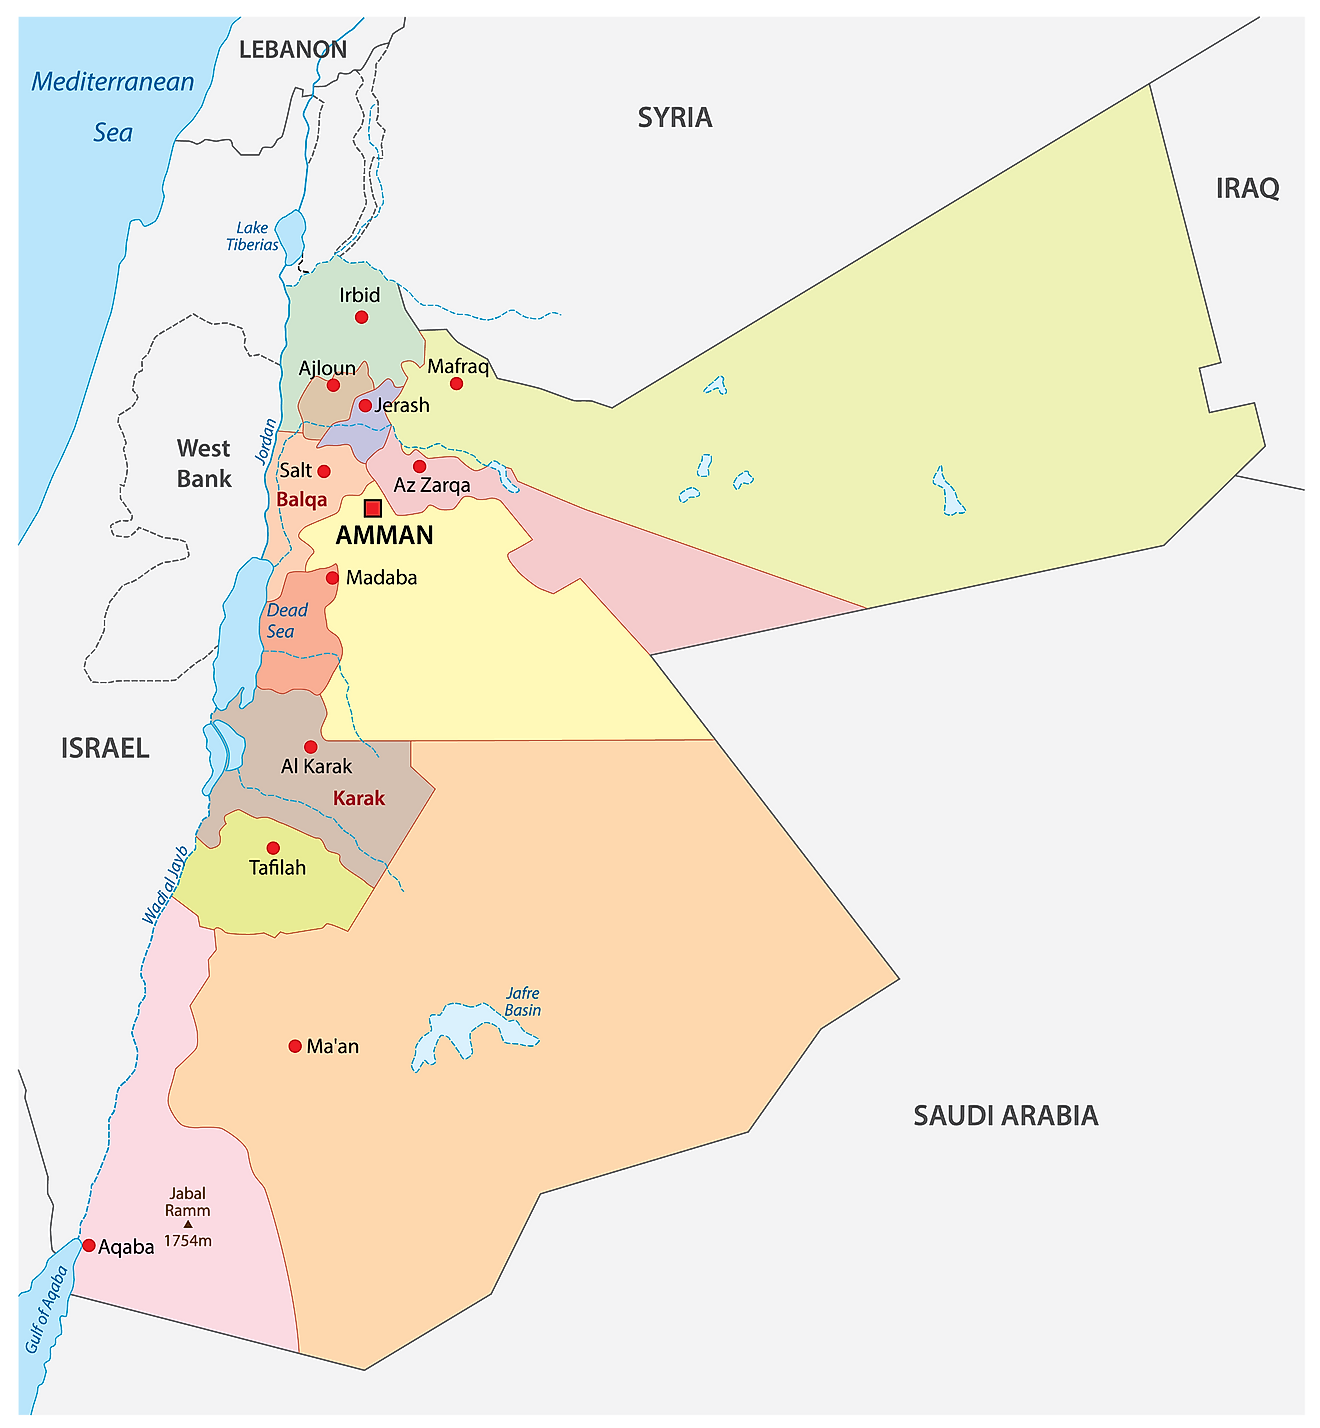 Political Map of Jordan displaying 12 governorates and the national capital of Amman.